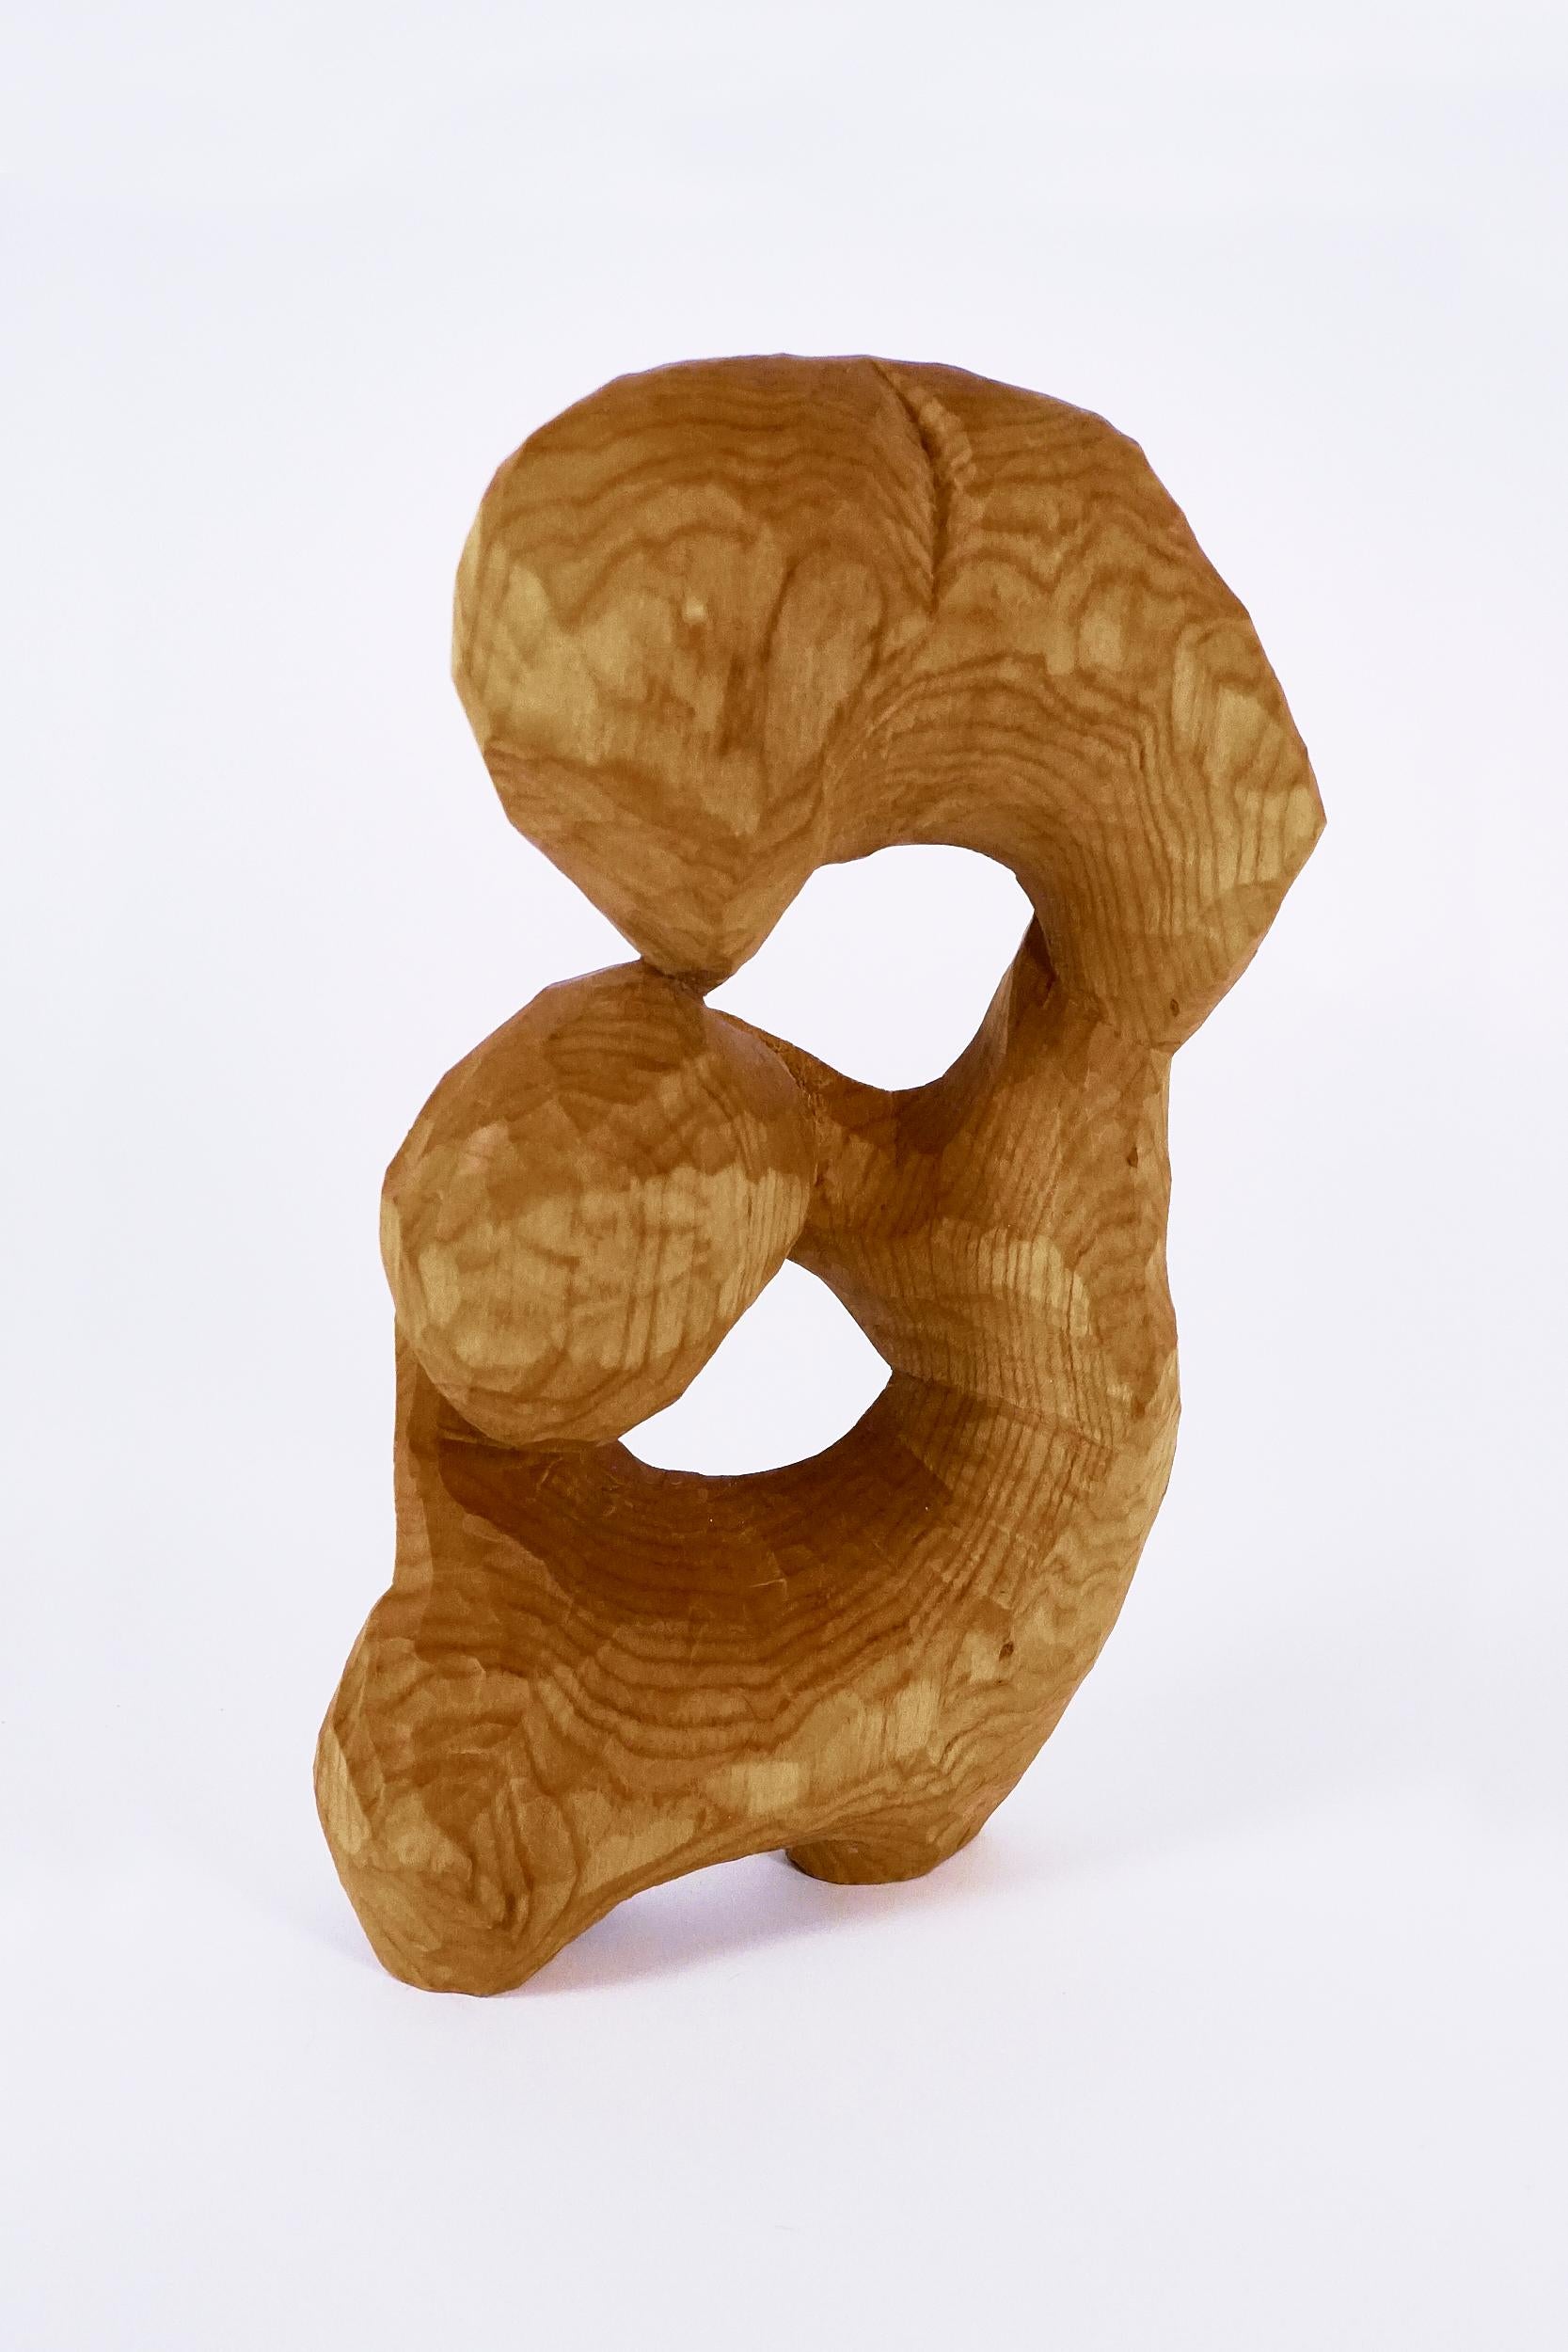 Jared Abner Abstract Sculpture - Carved Investigation One, Carved wood sculpture